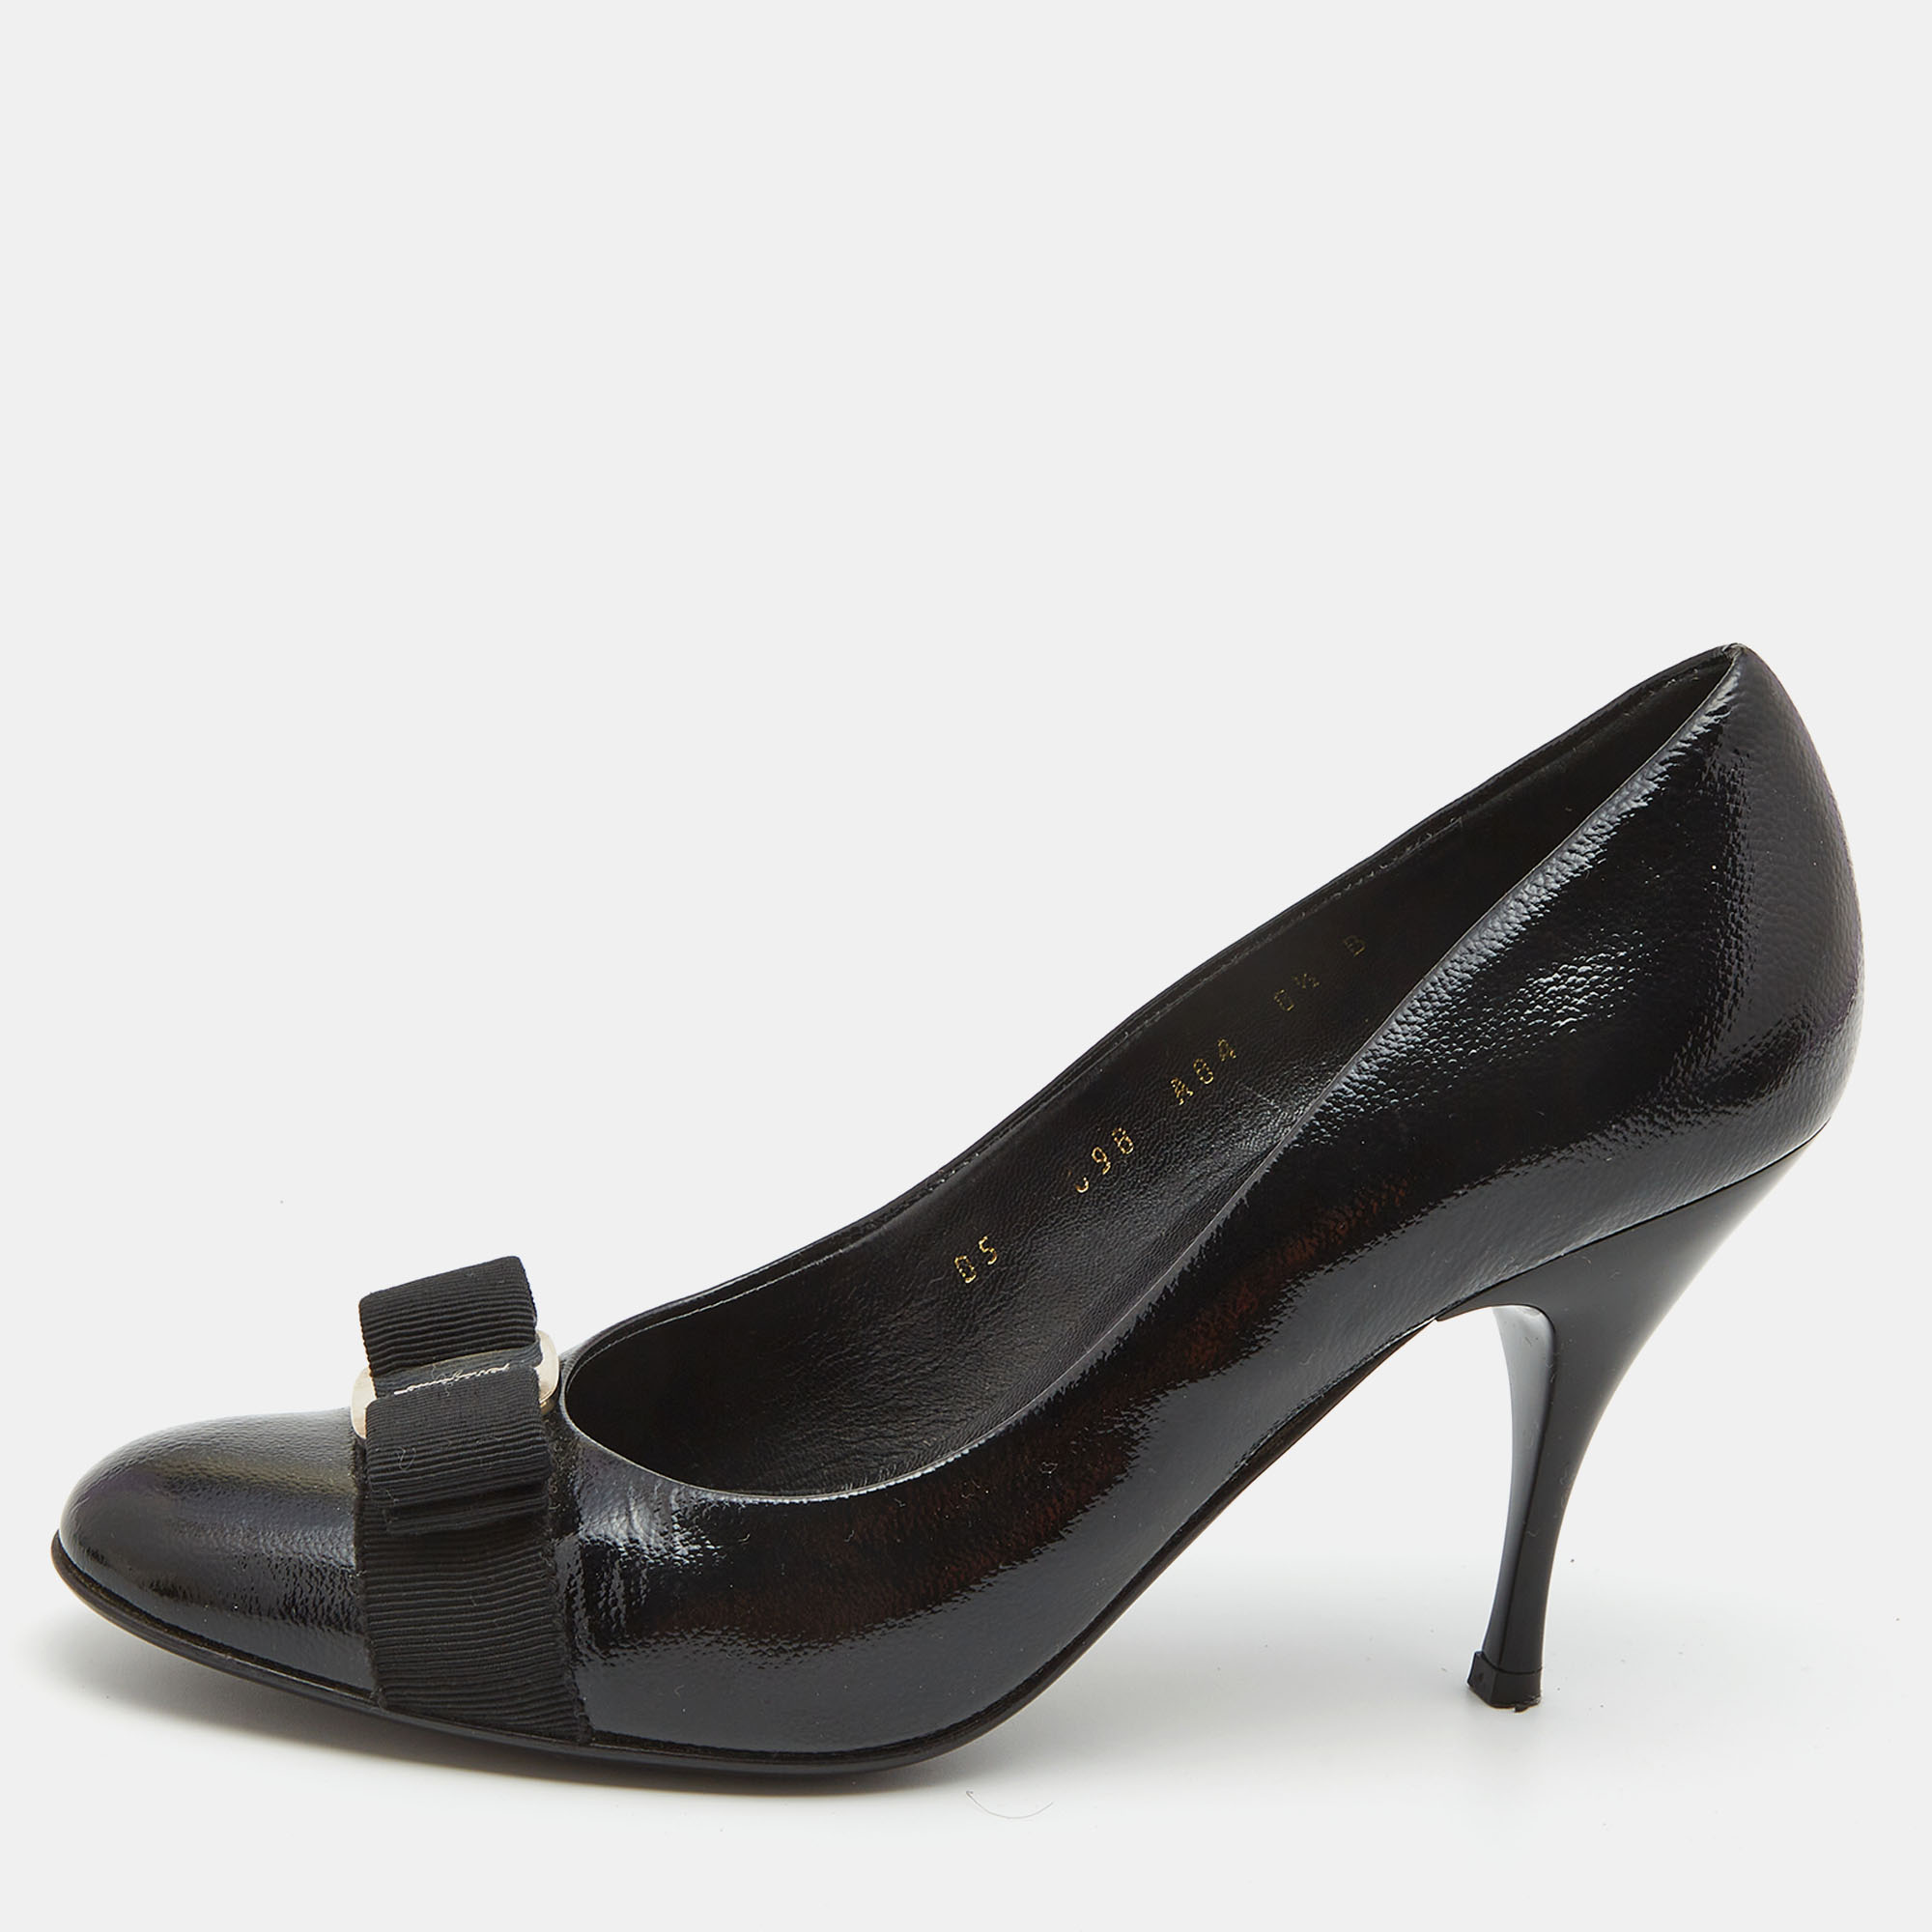 Pre-owned Ferragamo Black Patent Leather Vara Bow Pumps Size 39